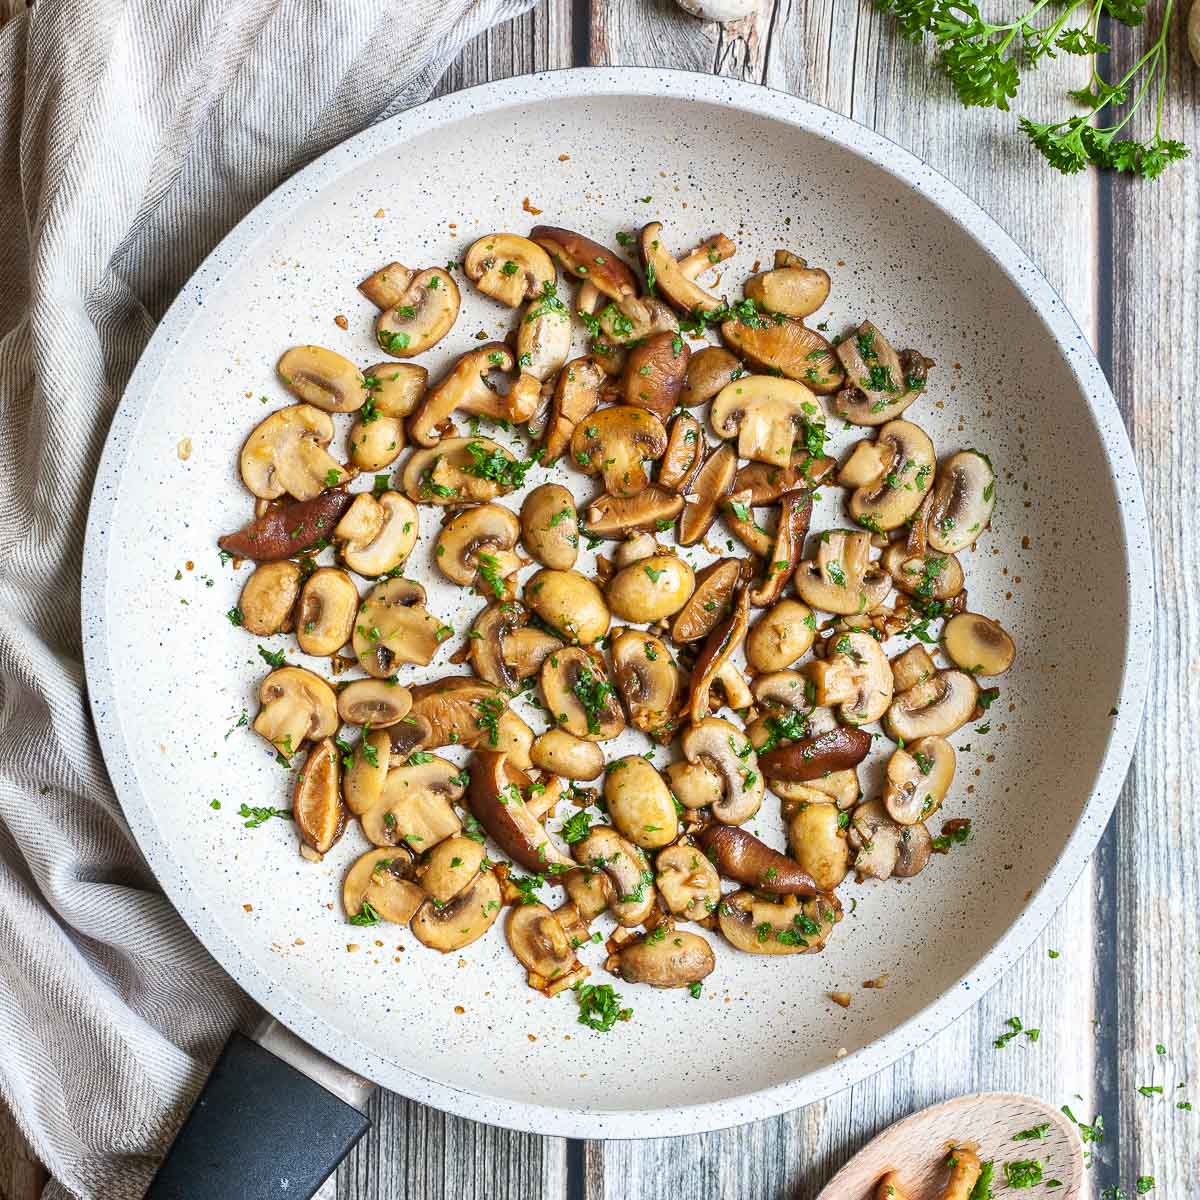 Golden brown sliced button and shiitake mushrooms in a frying pan topped with freshly chopped greens. A wooden spoon is next to it as well as some raw ingredients.